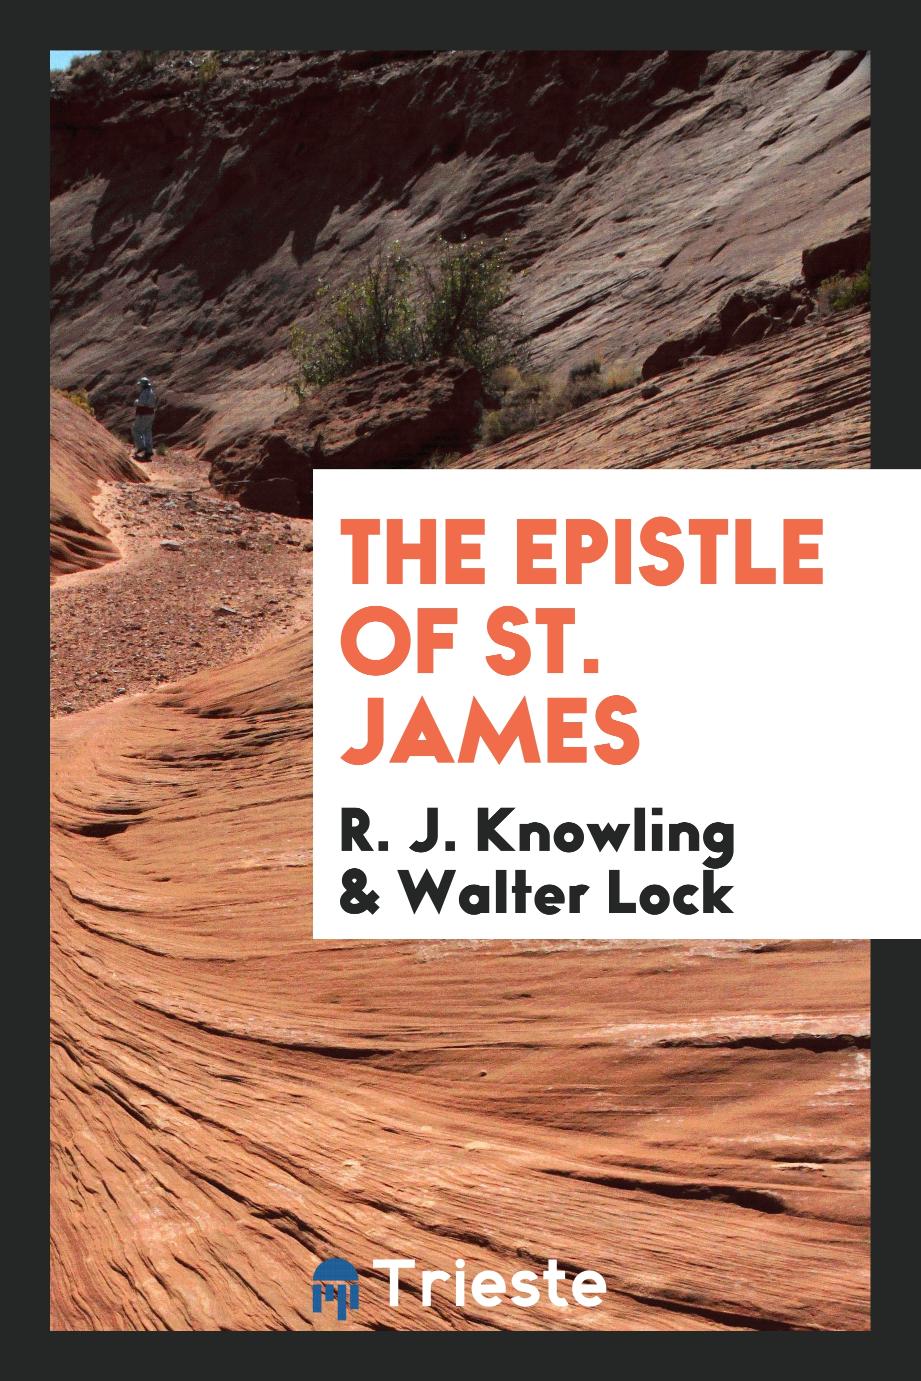 R. J. Knowling, Walter Lock - The Epistle of St. James